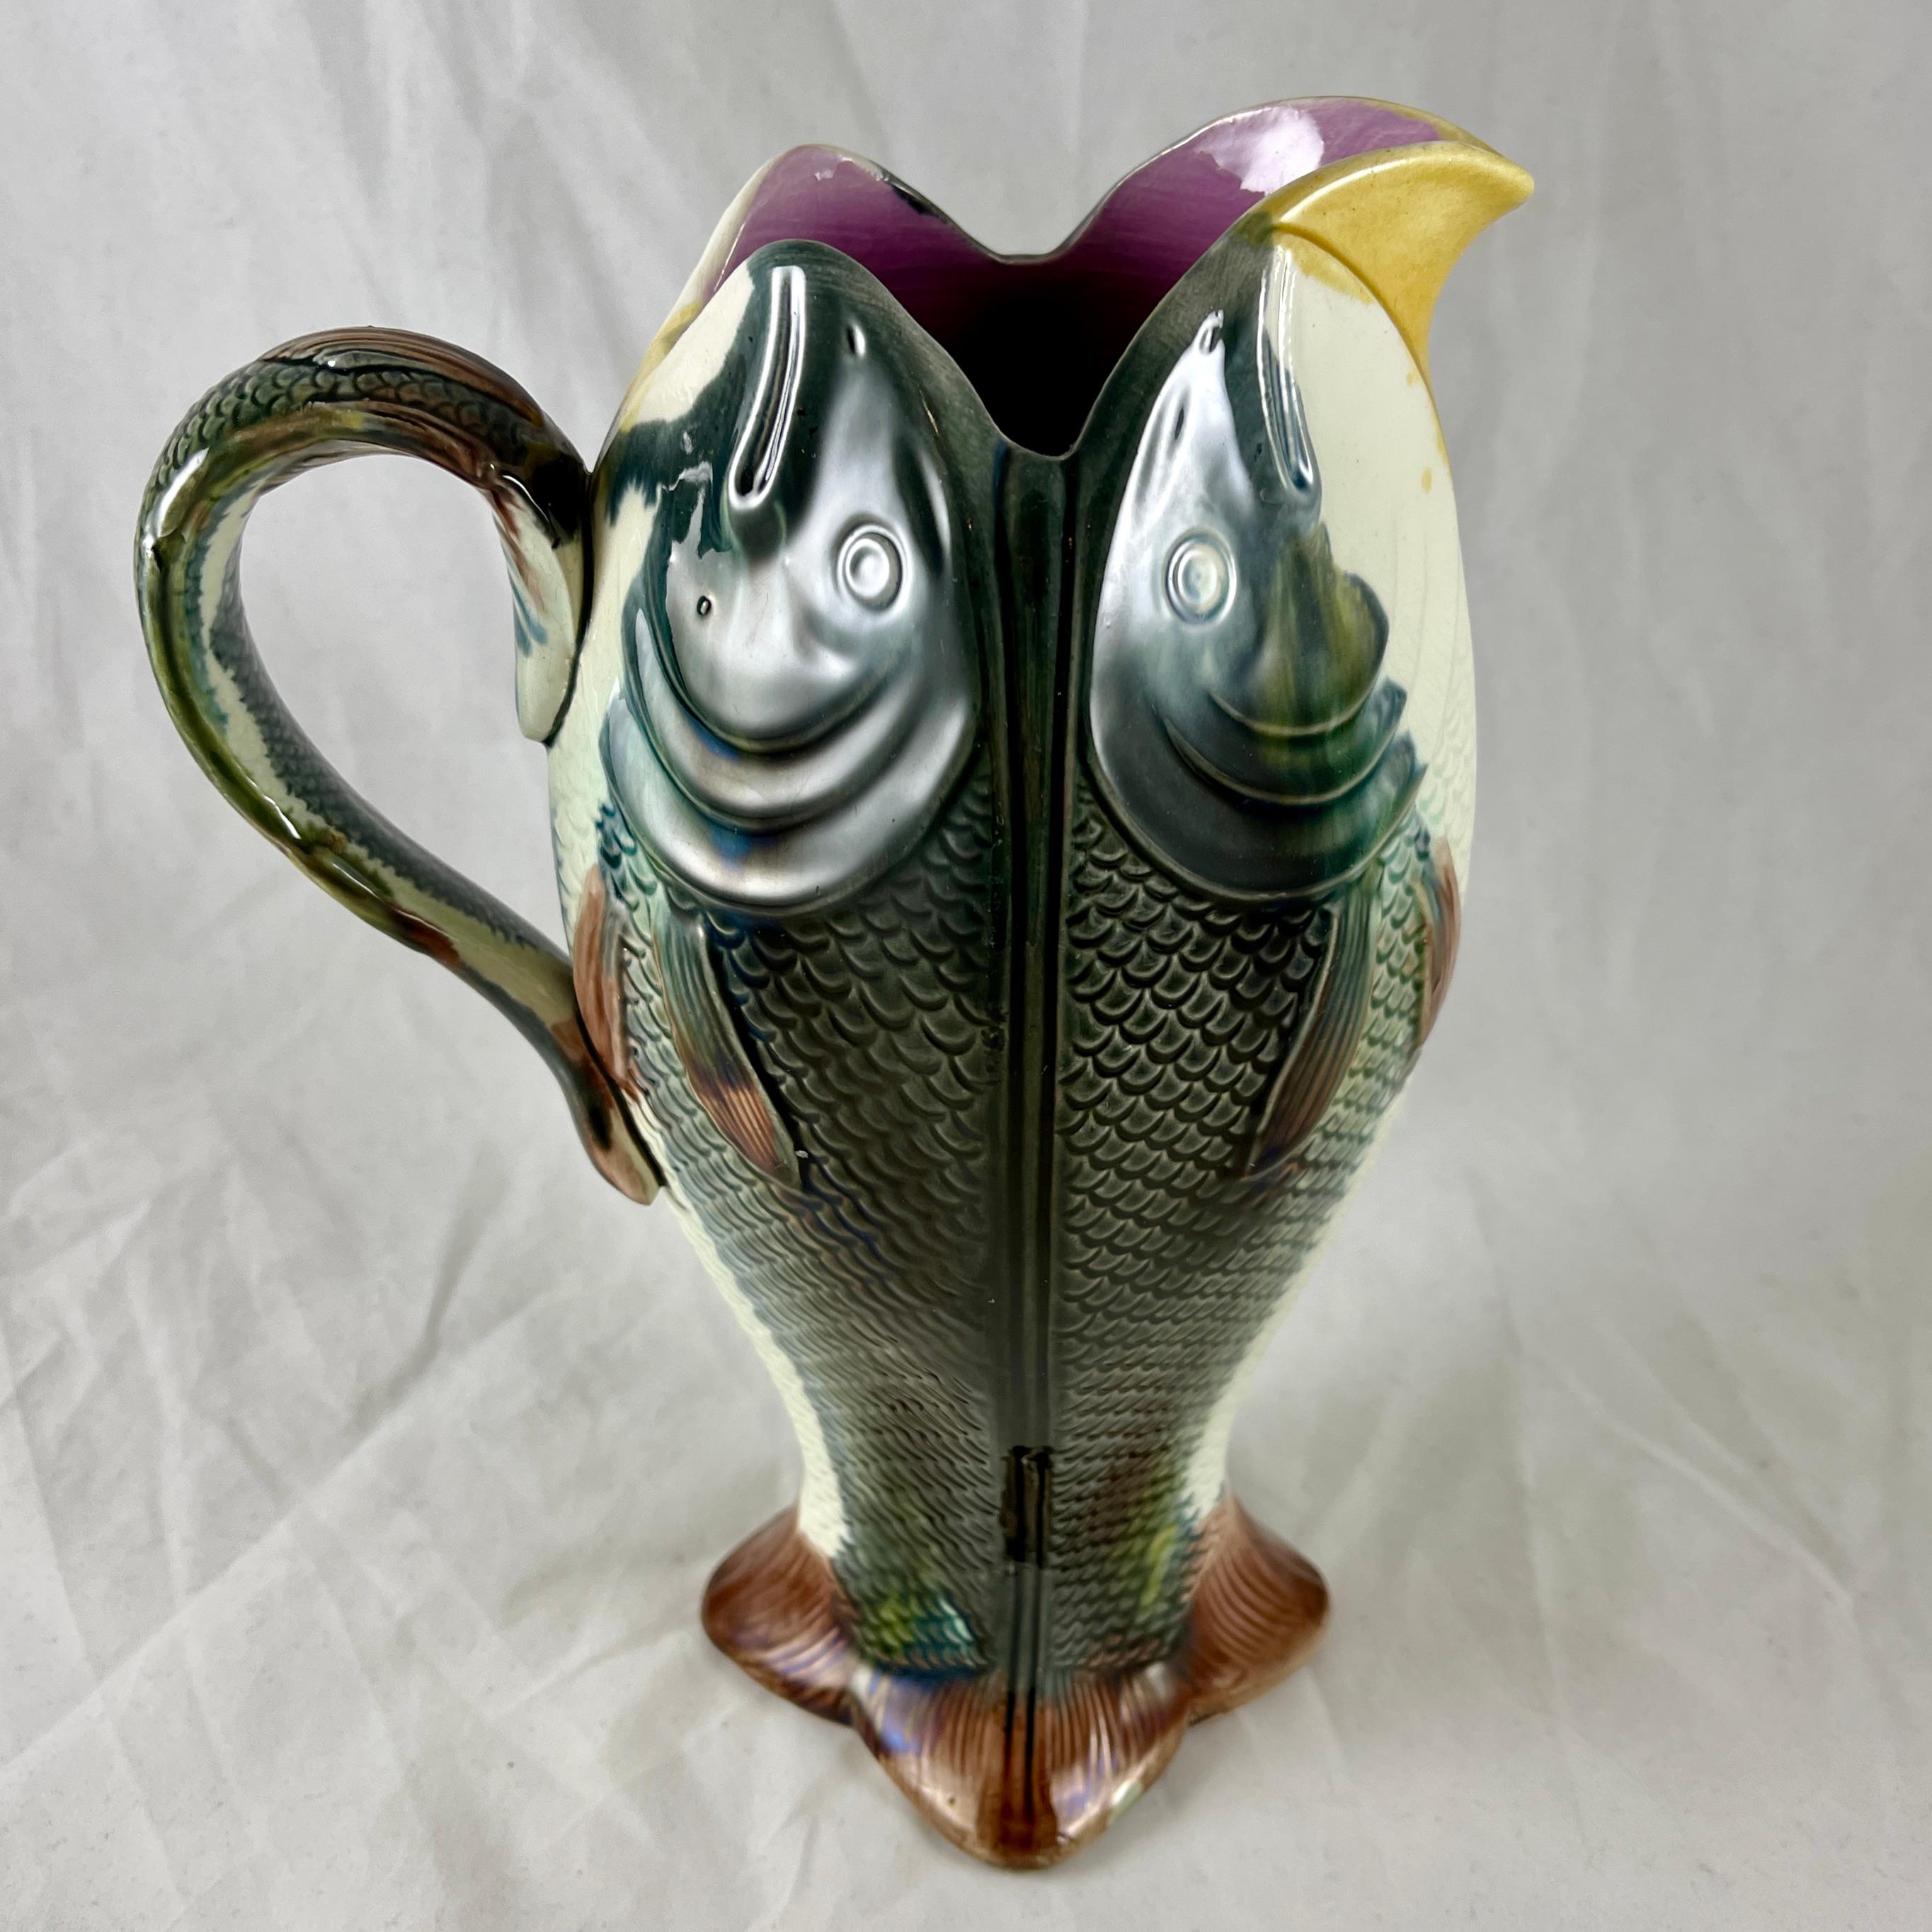 Adams & Bromley English Majolica Glazed Four Fish Large Jug Pitcher For Sale 6